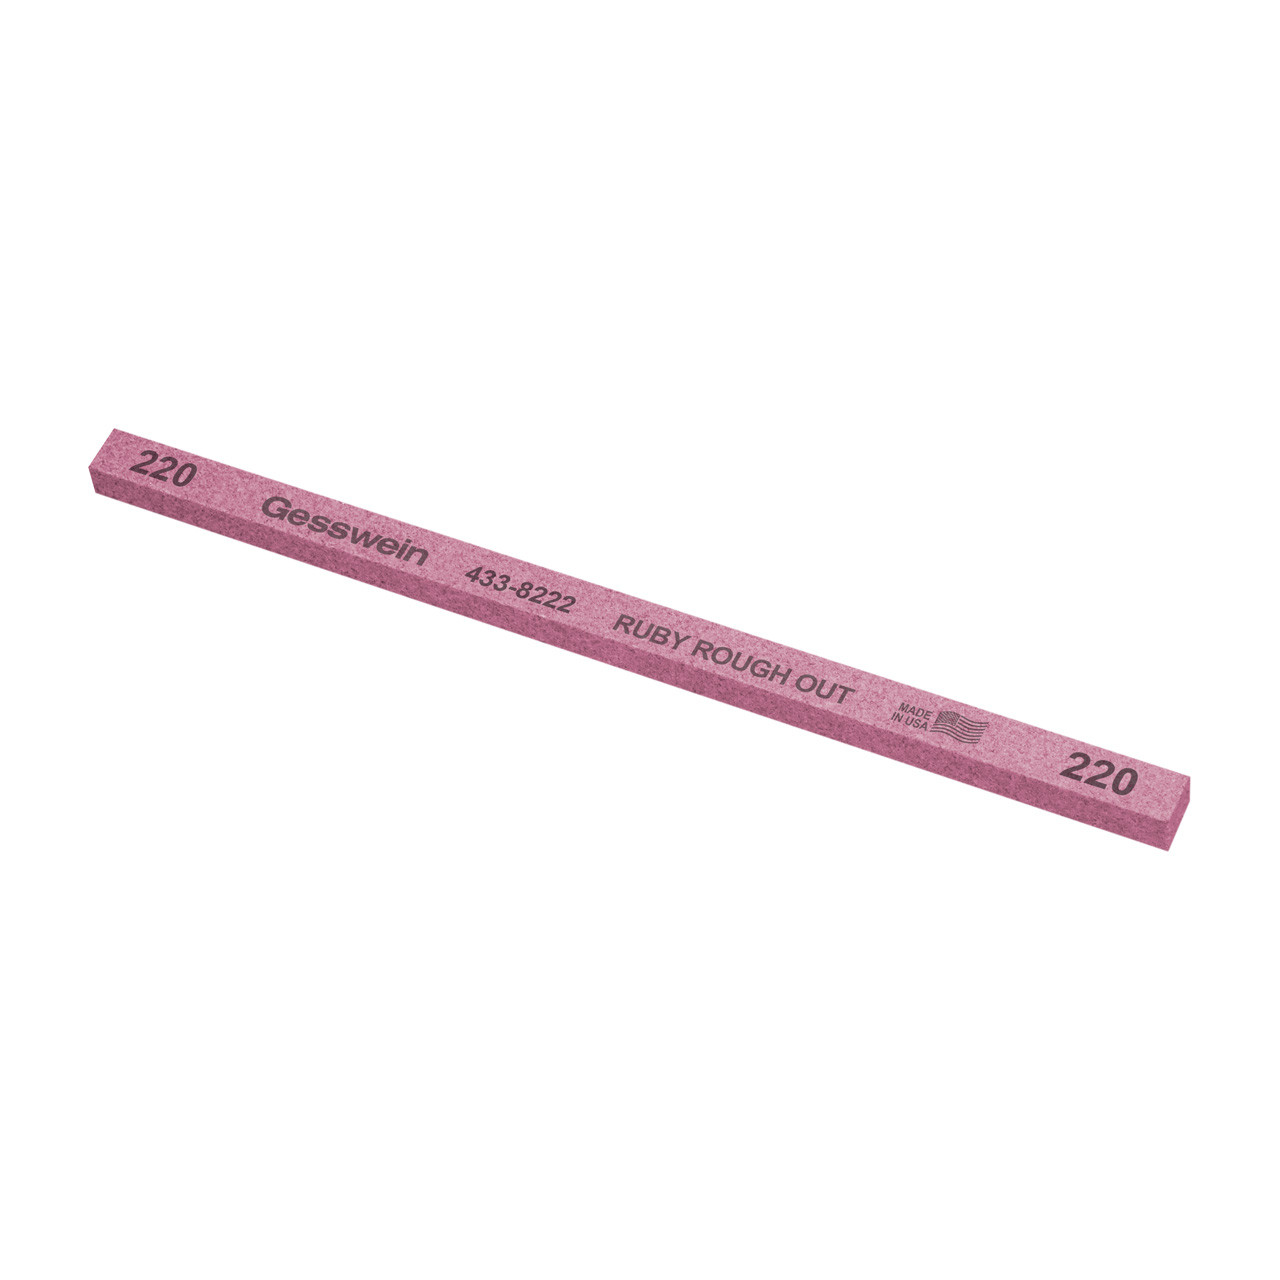 Gesswein® Ruby Rough Out Stones - 1/4" x 1/4" x 6", 220 Grit  (Pkg. of 12)